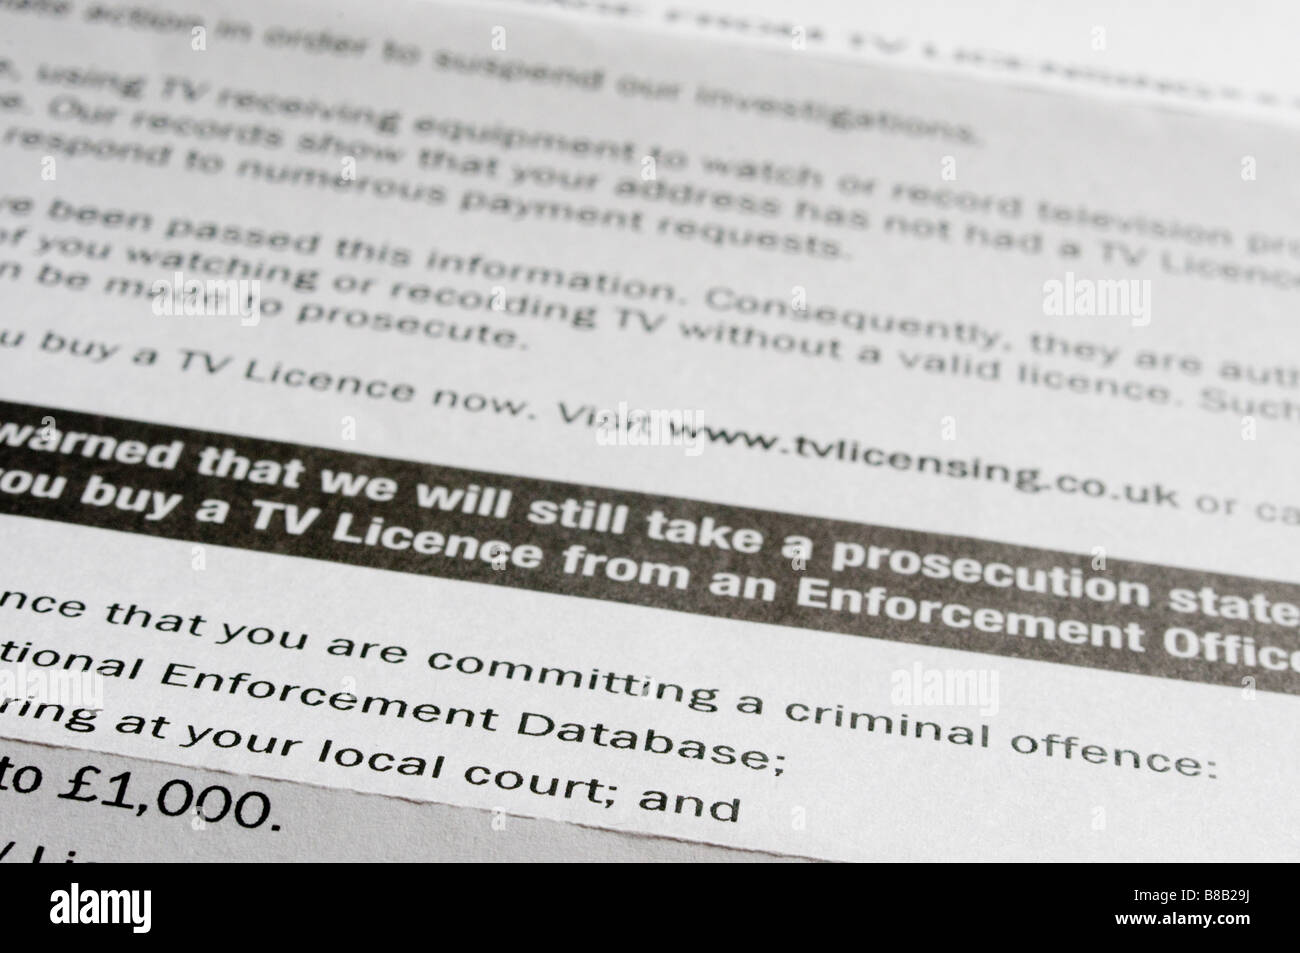 Letter from TV Licencing warning about criminal/legal proceedings if licence is not purchased. Stock Photo